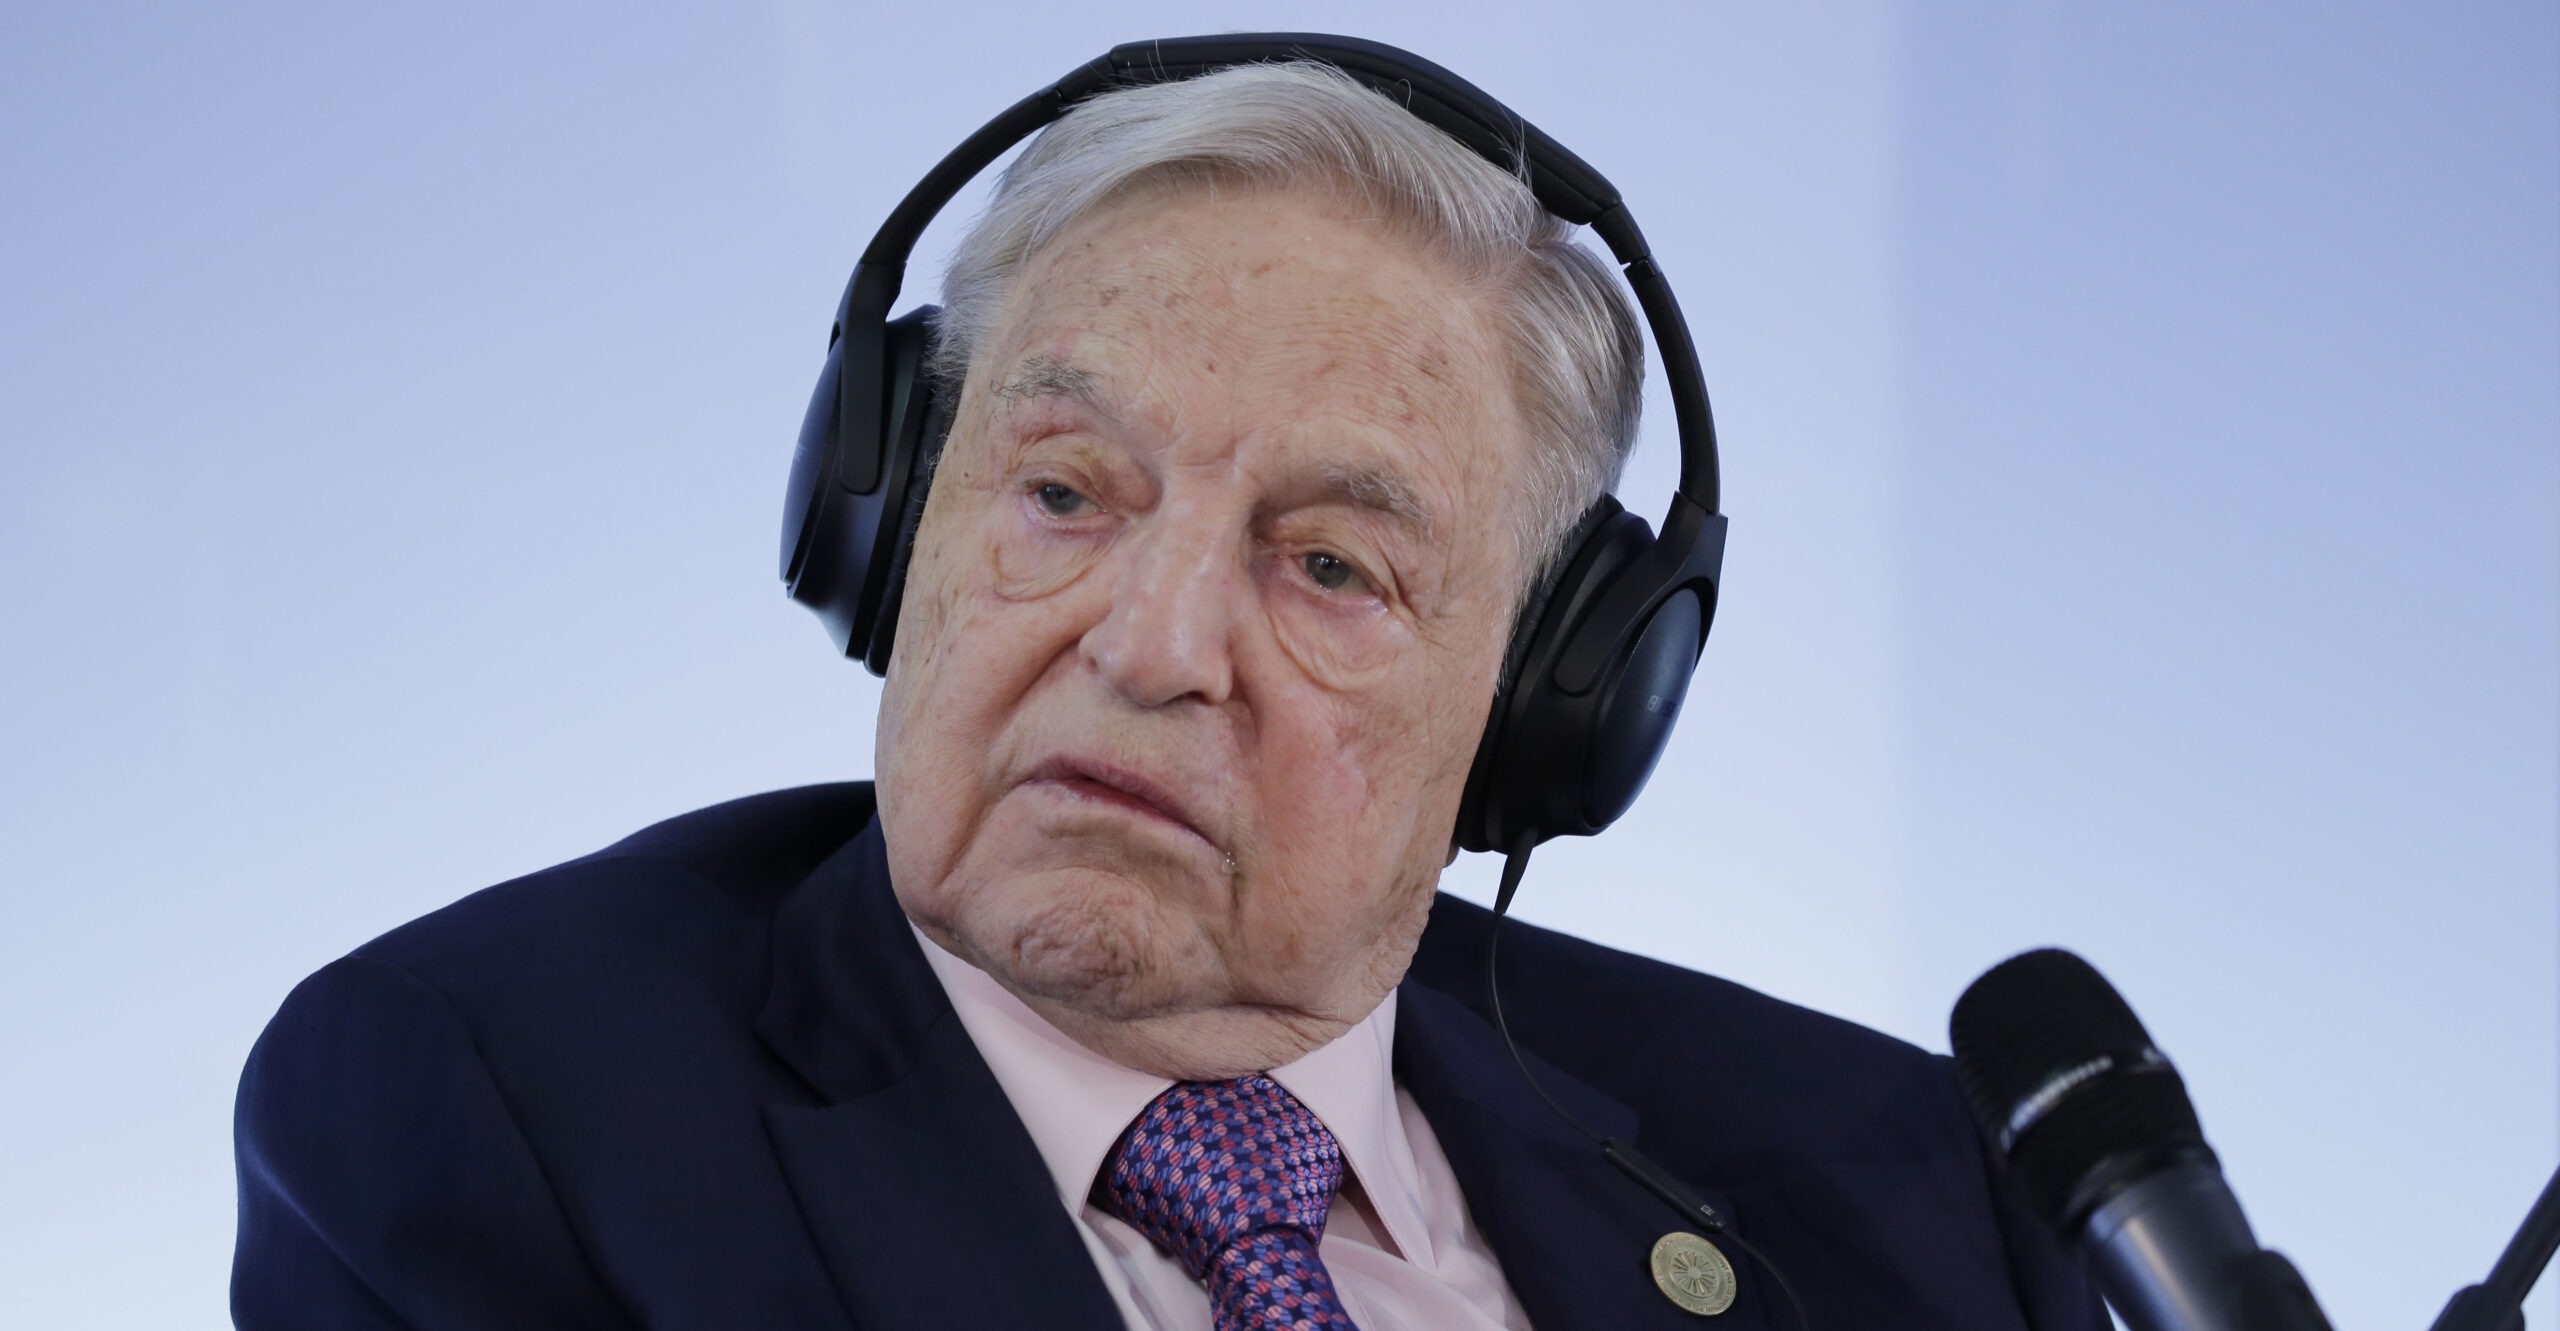 Soros-Funded Prosecutors Put 'Social Justice' Above Law and Order, Analysts Say